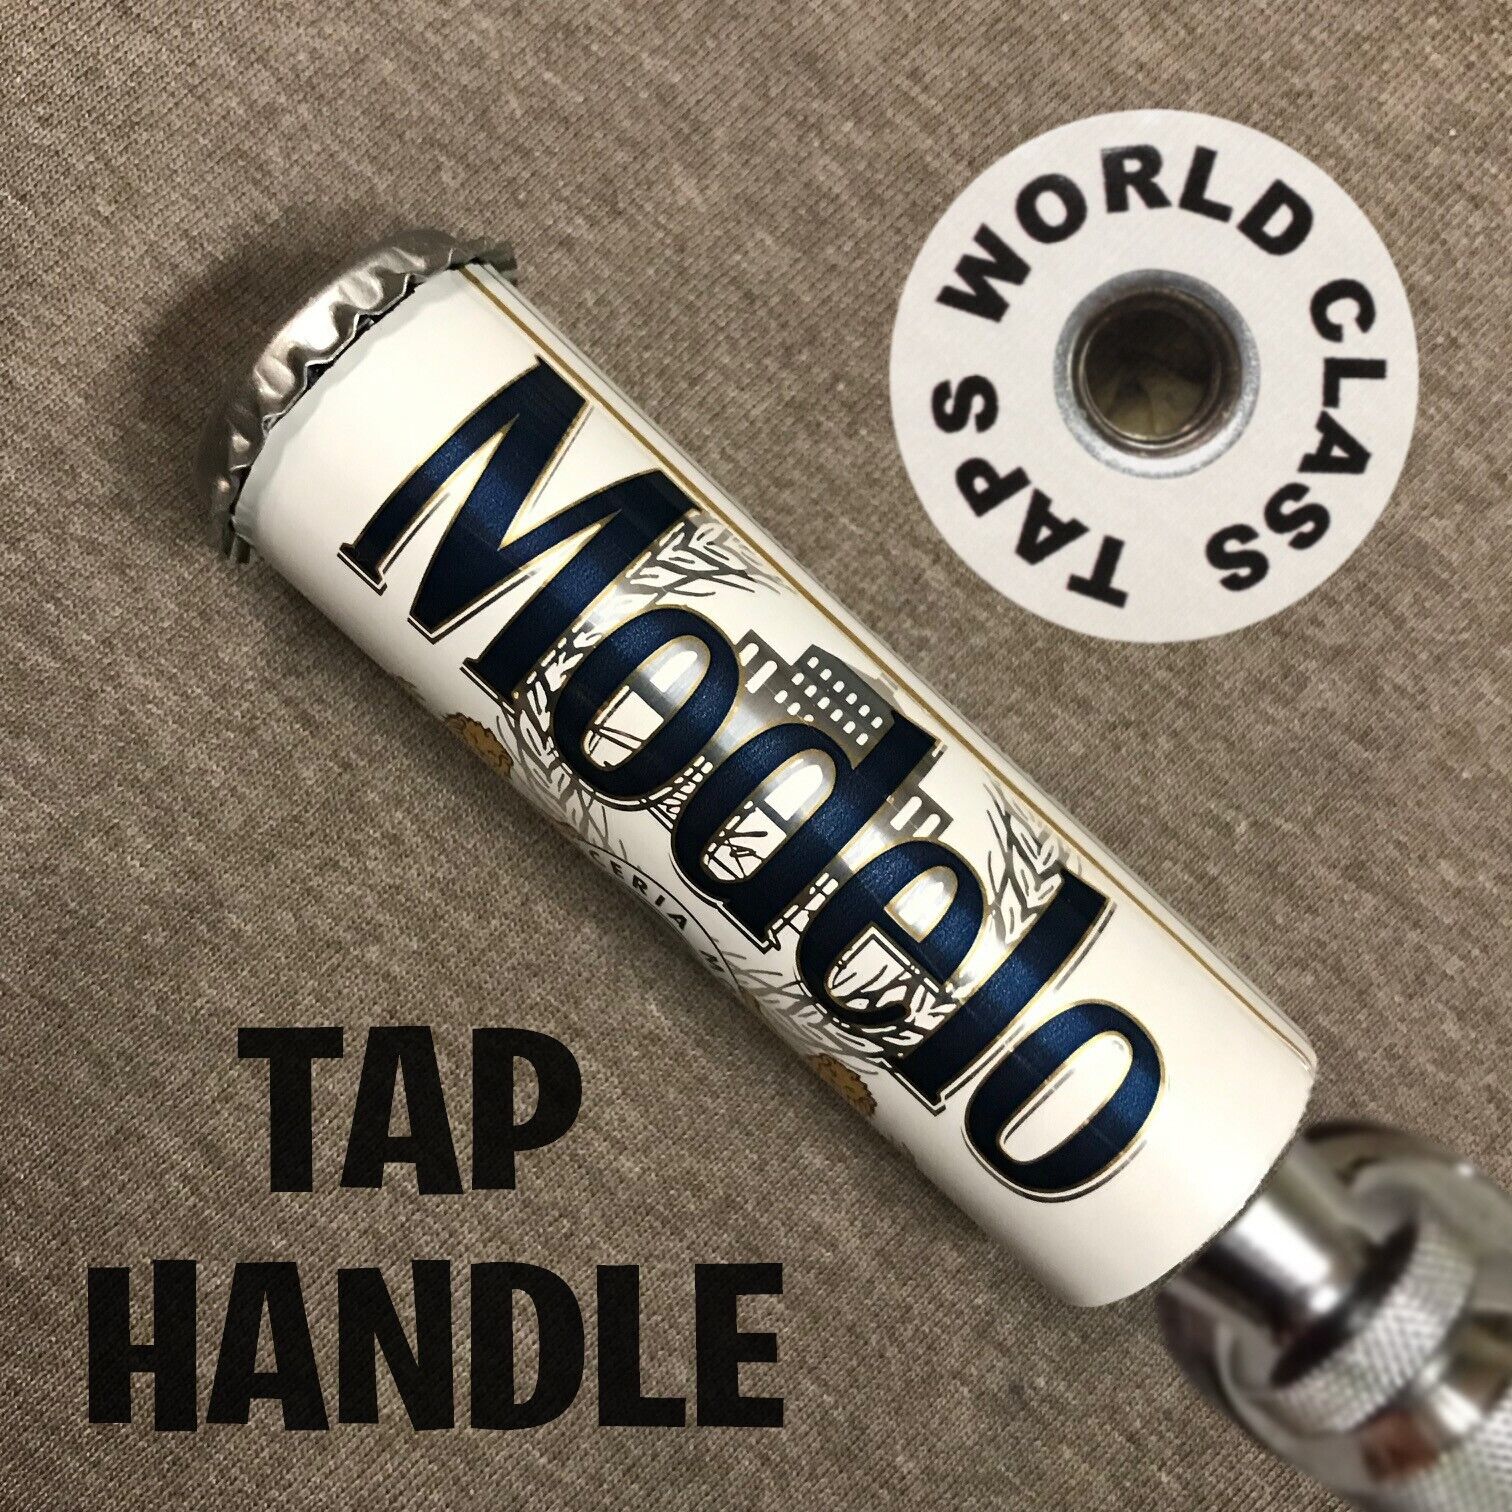 short slim MODELO ESPECIAL BEER TAP HANDLE marker tapper stubby MEXICO 3.5in